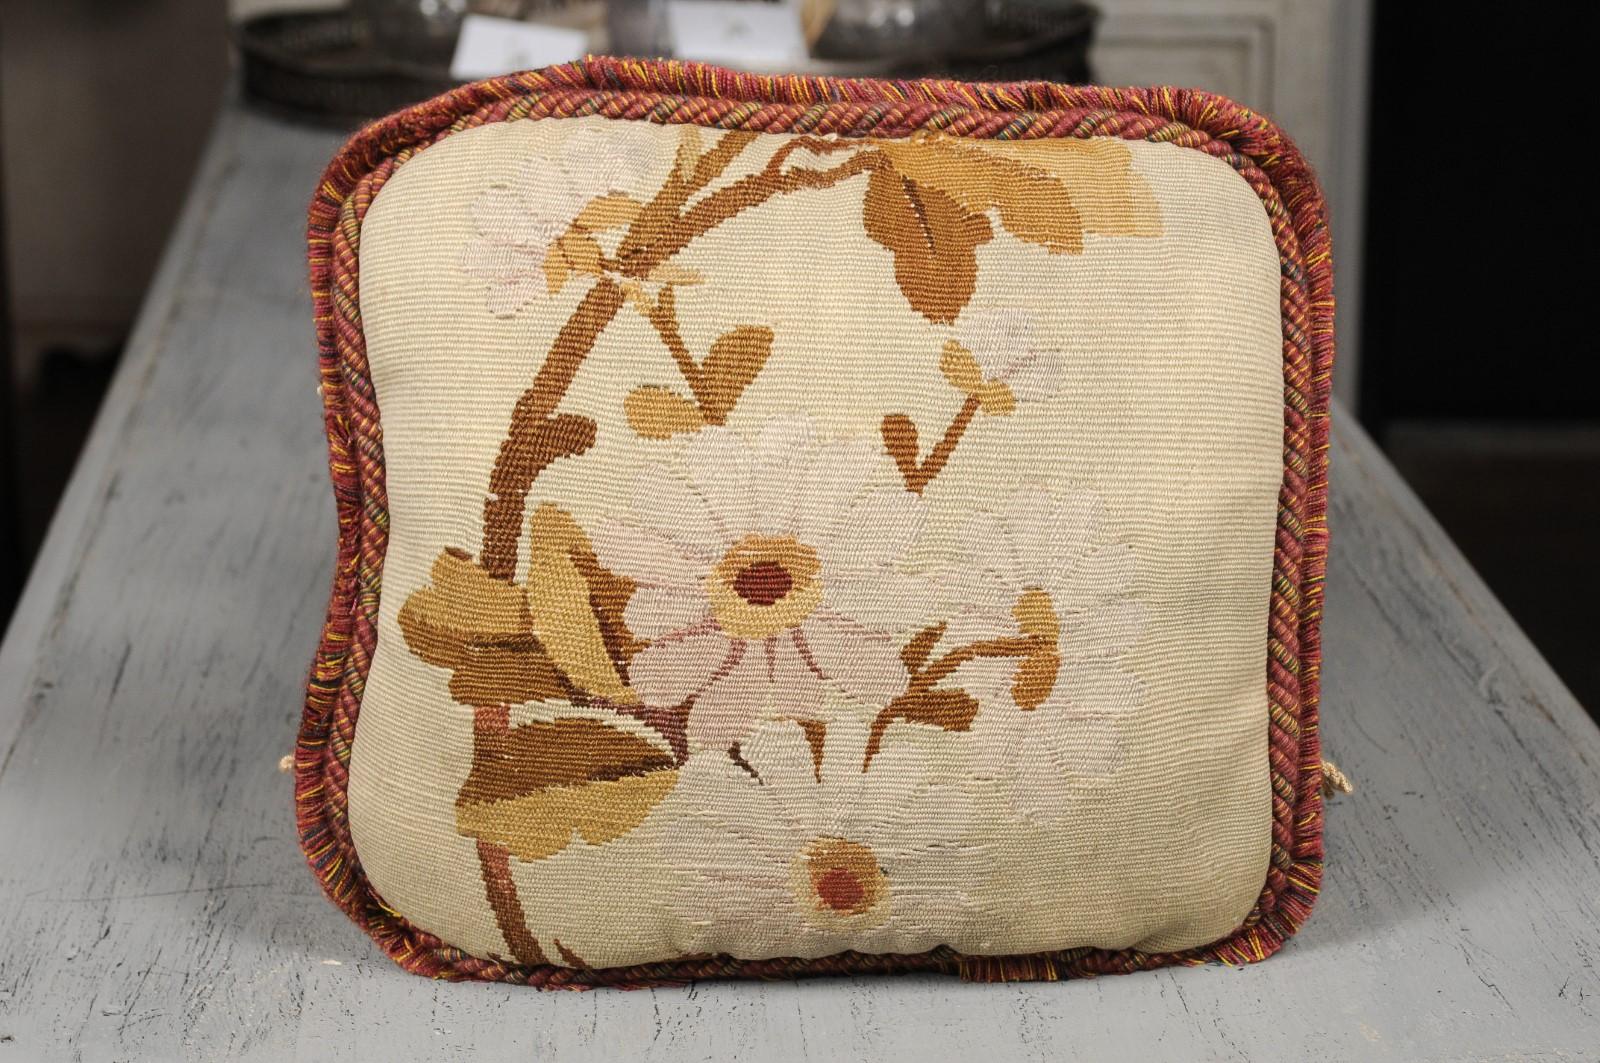 A French Aubusson tapestry pillow from the 19th century, with white daisies, cord trim and fringe accents. Born in central France during the 19th century, this charming rectangular pillow features a floral décor, depicting white daisies and brown